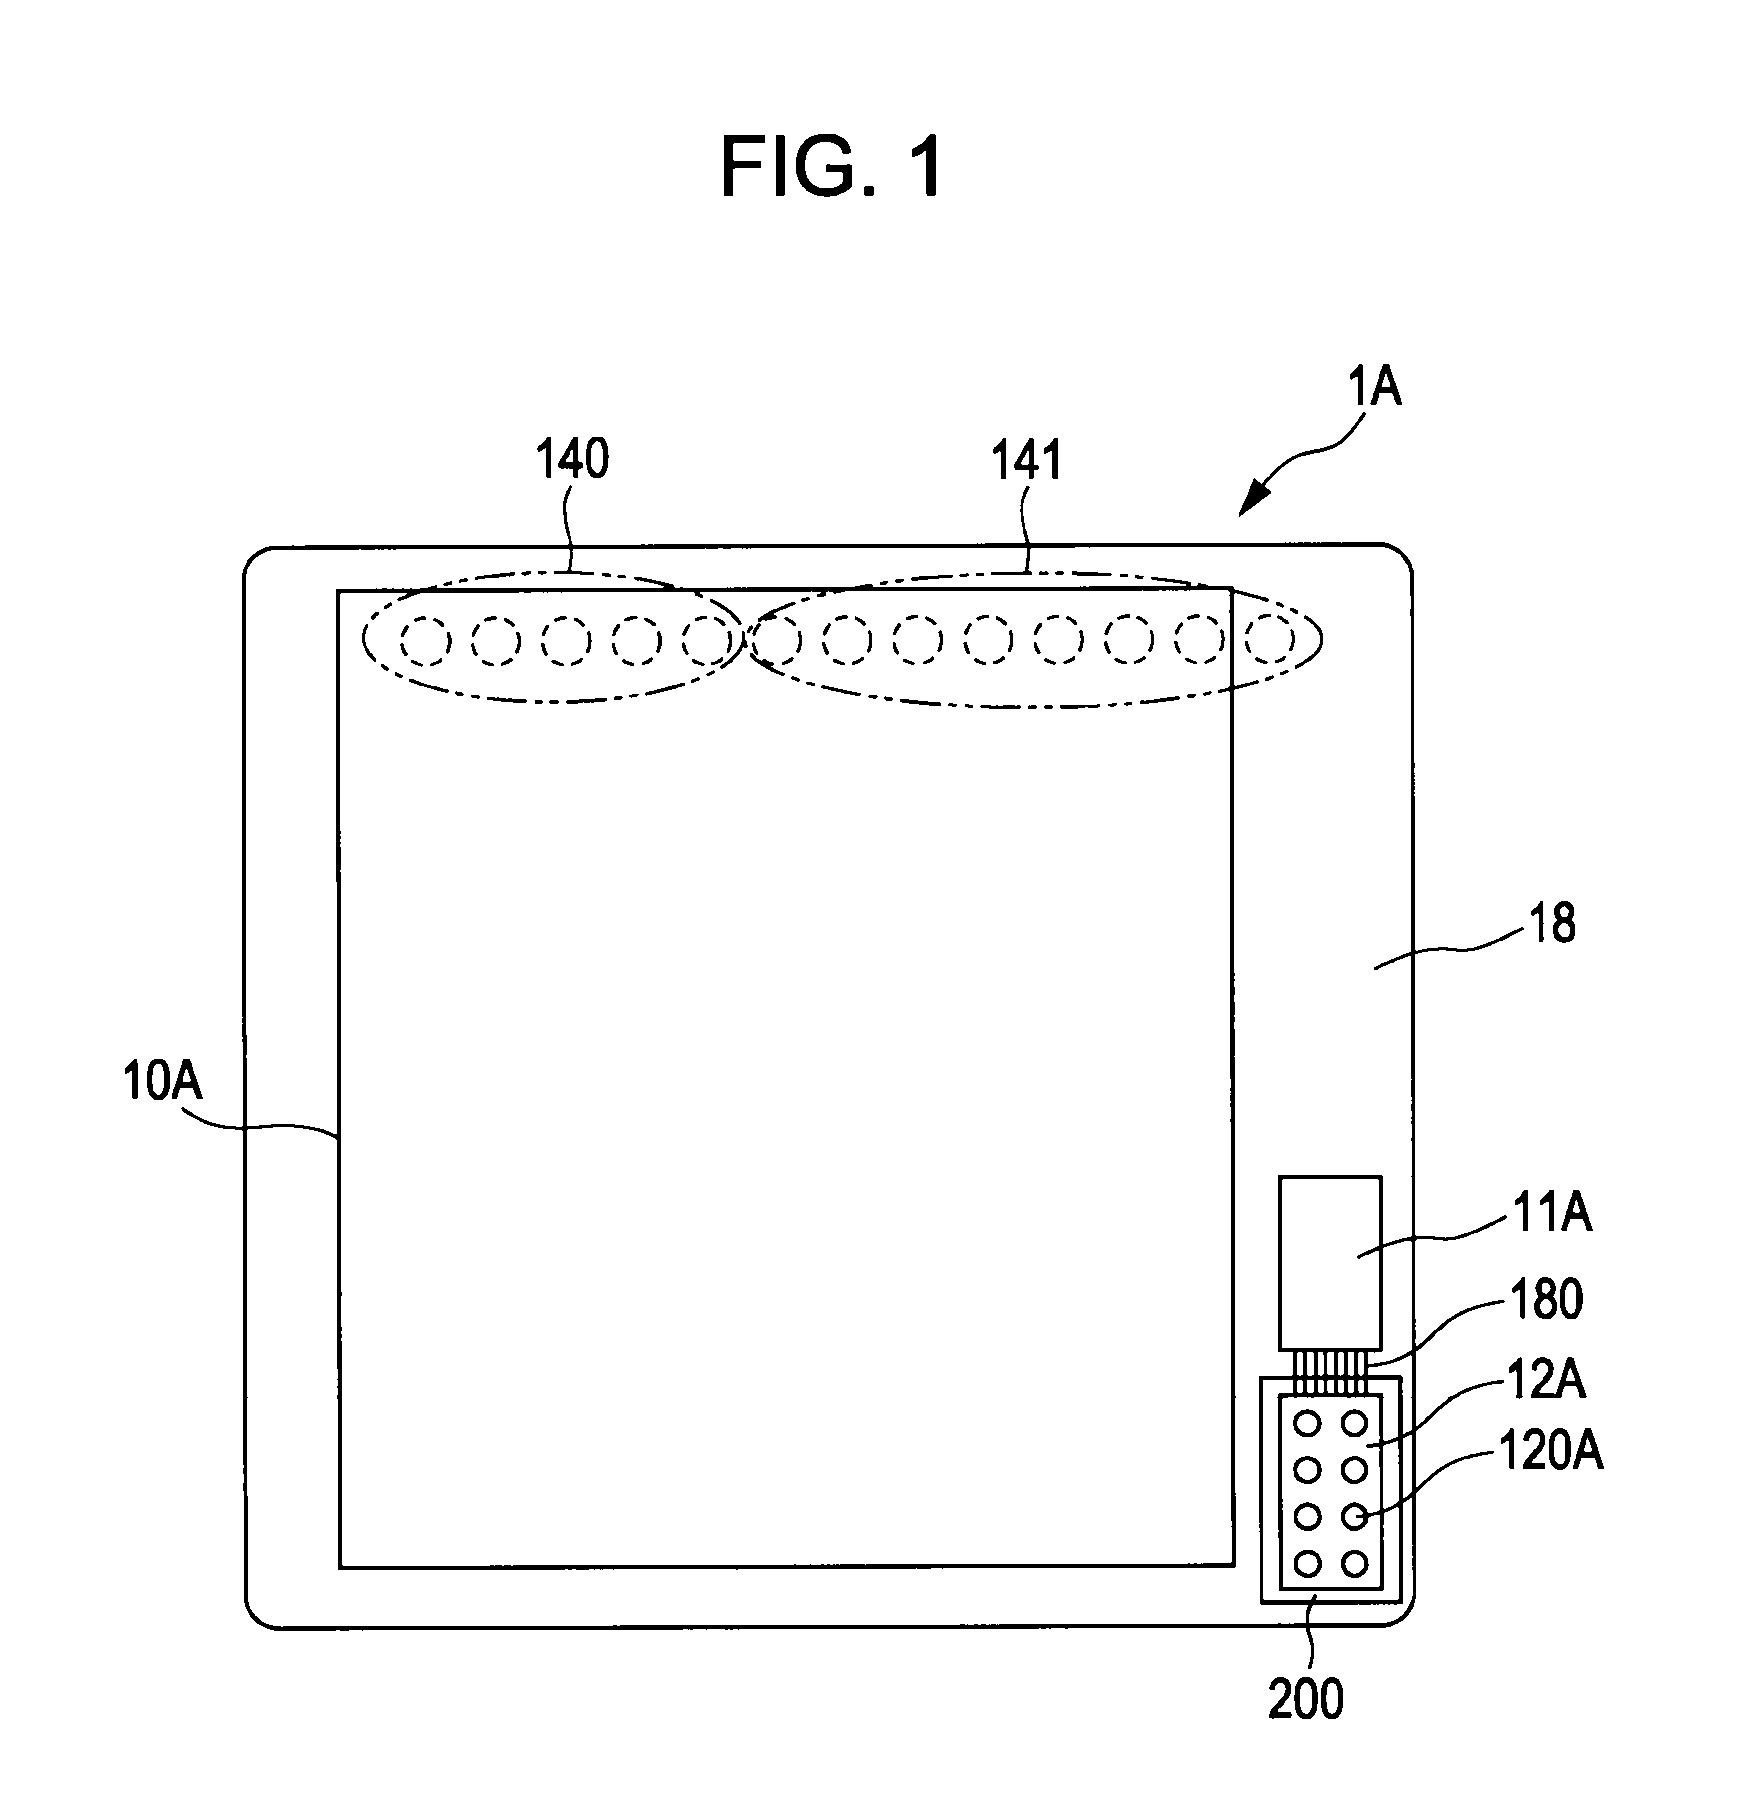 Solid-state imaging device and signal processing system